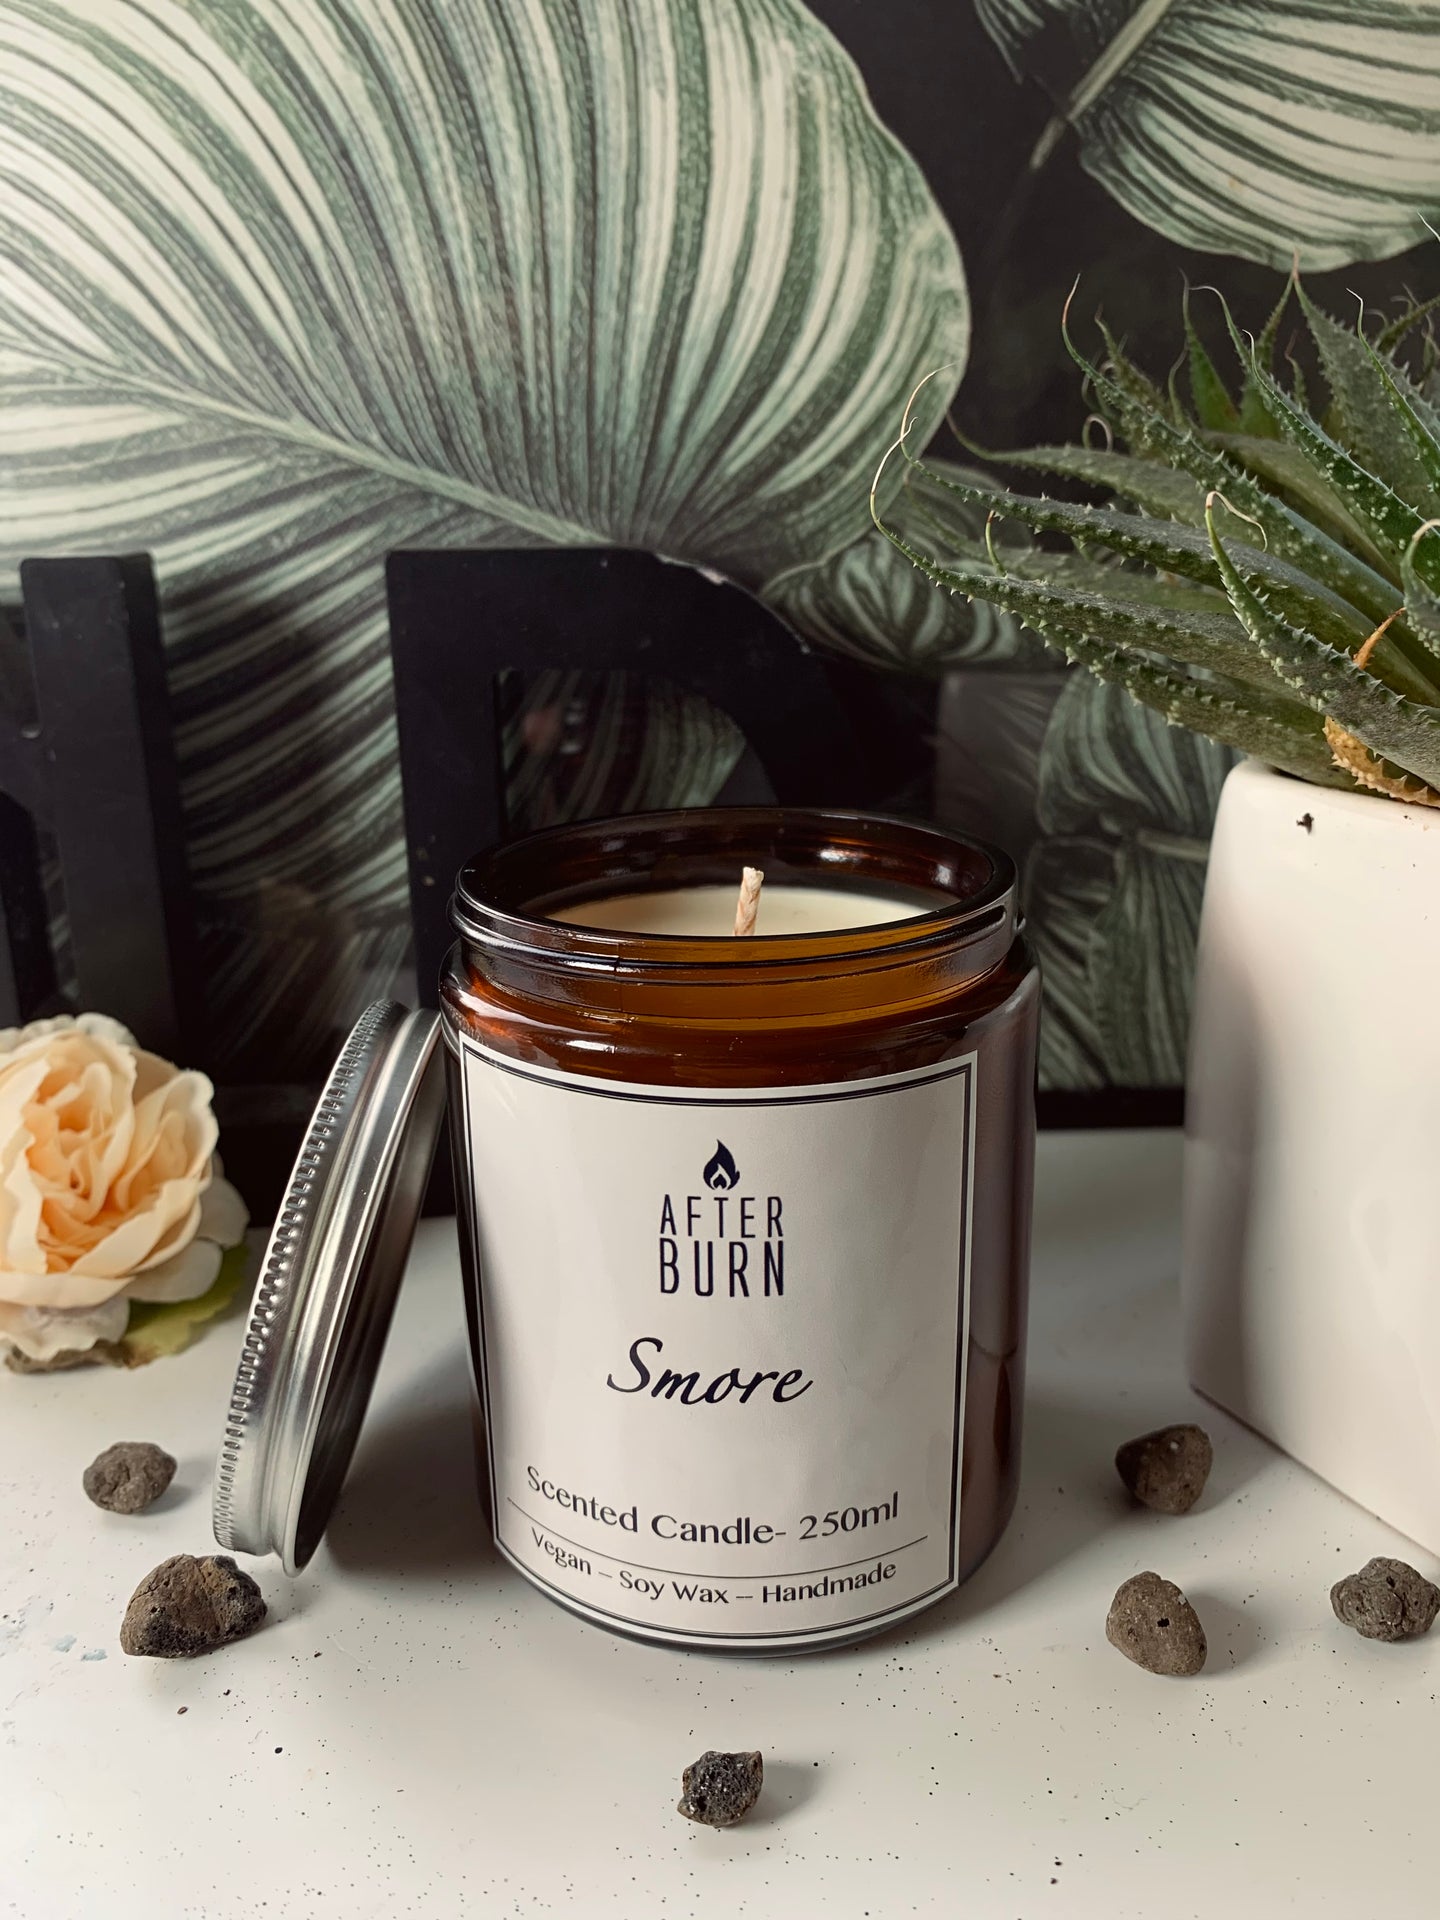 250ml Smore Scented Candle